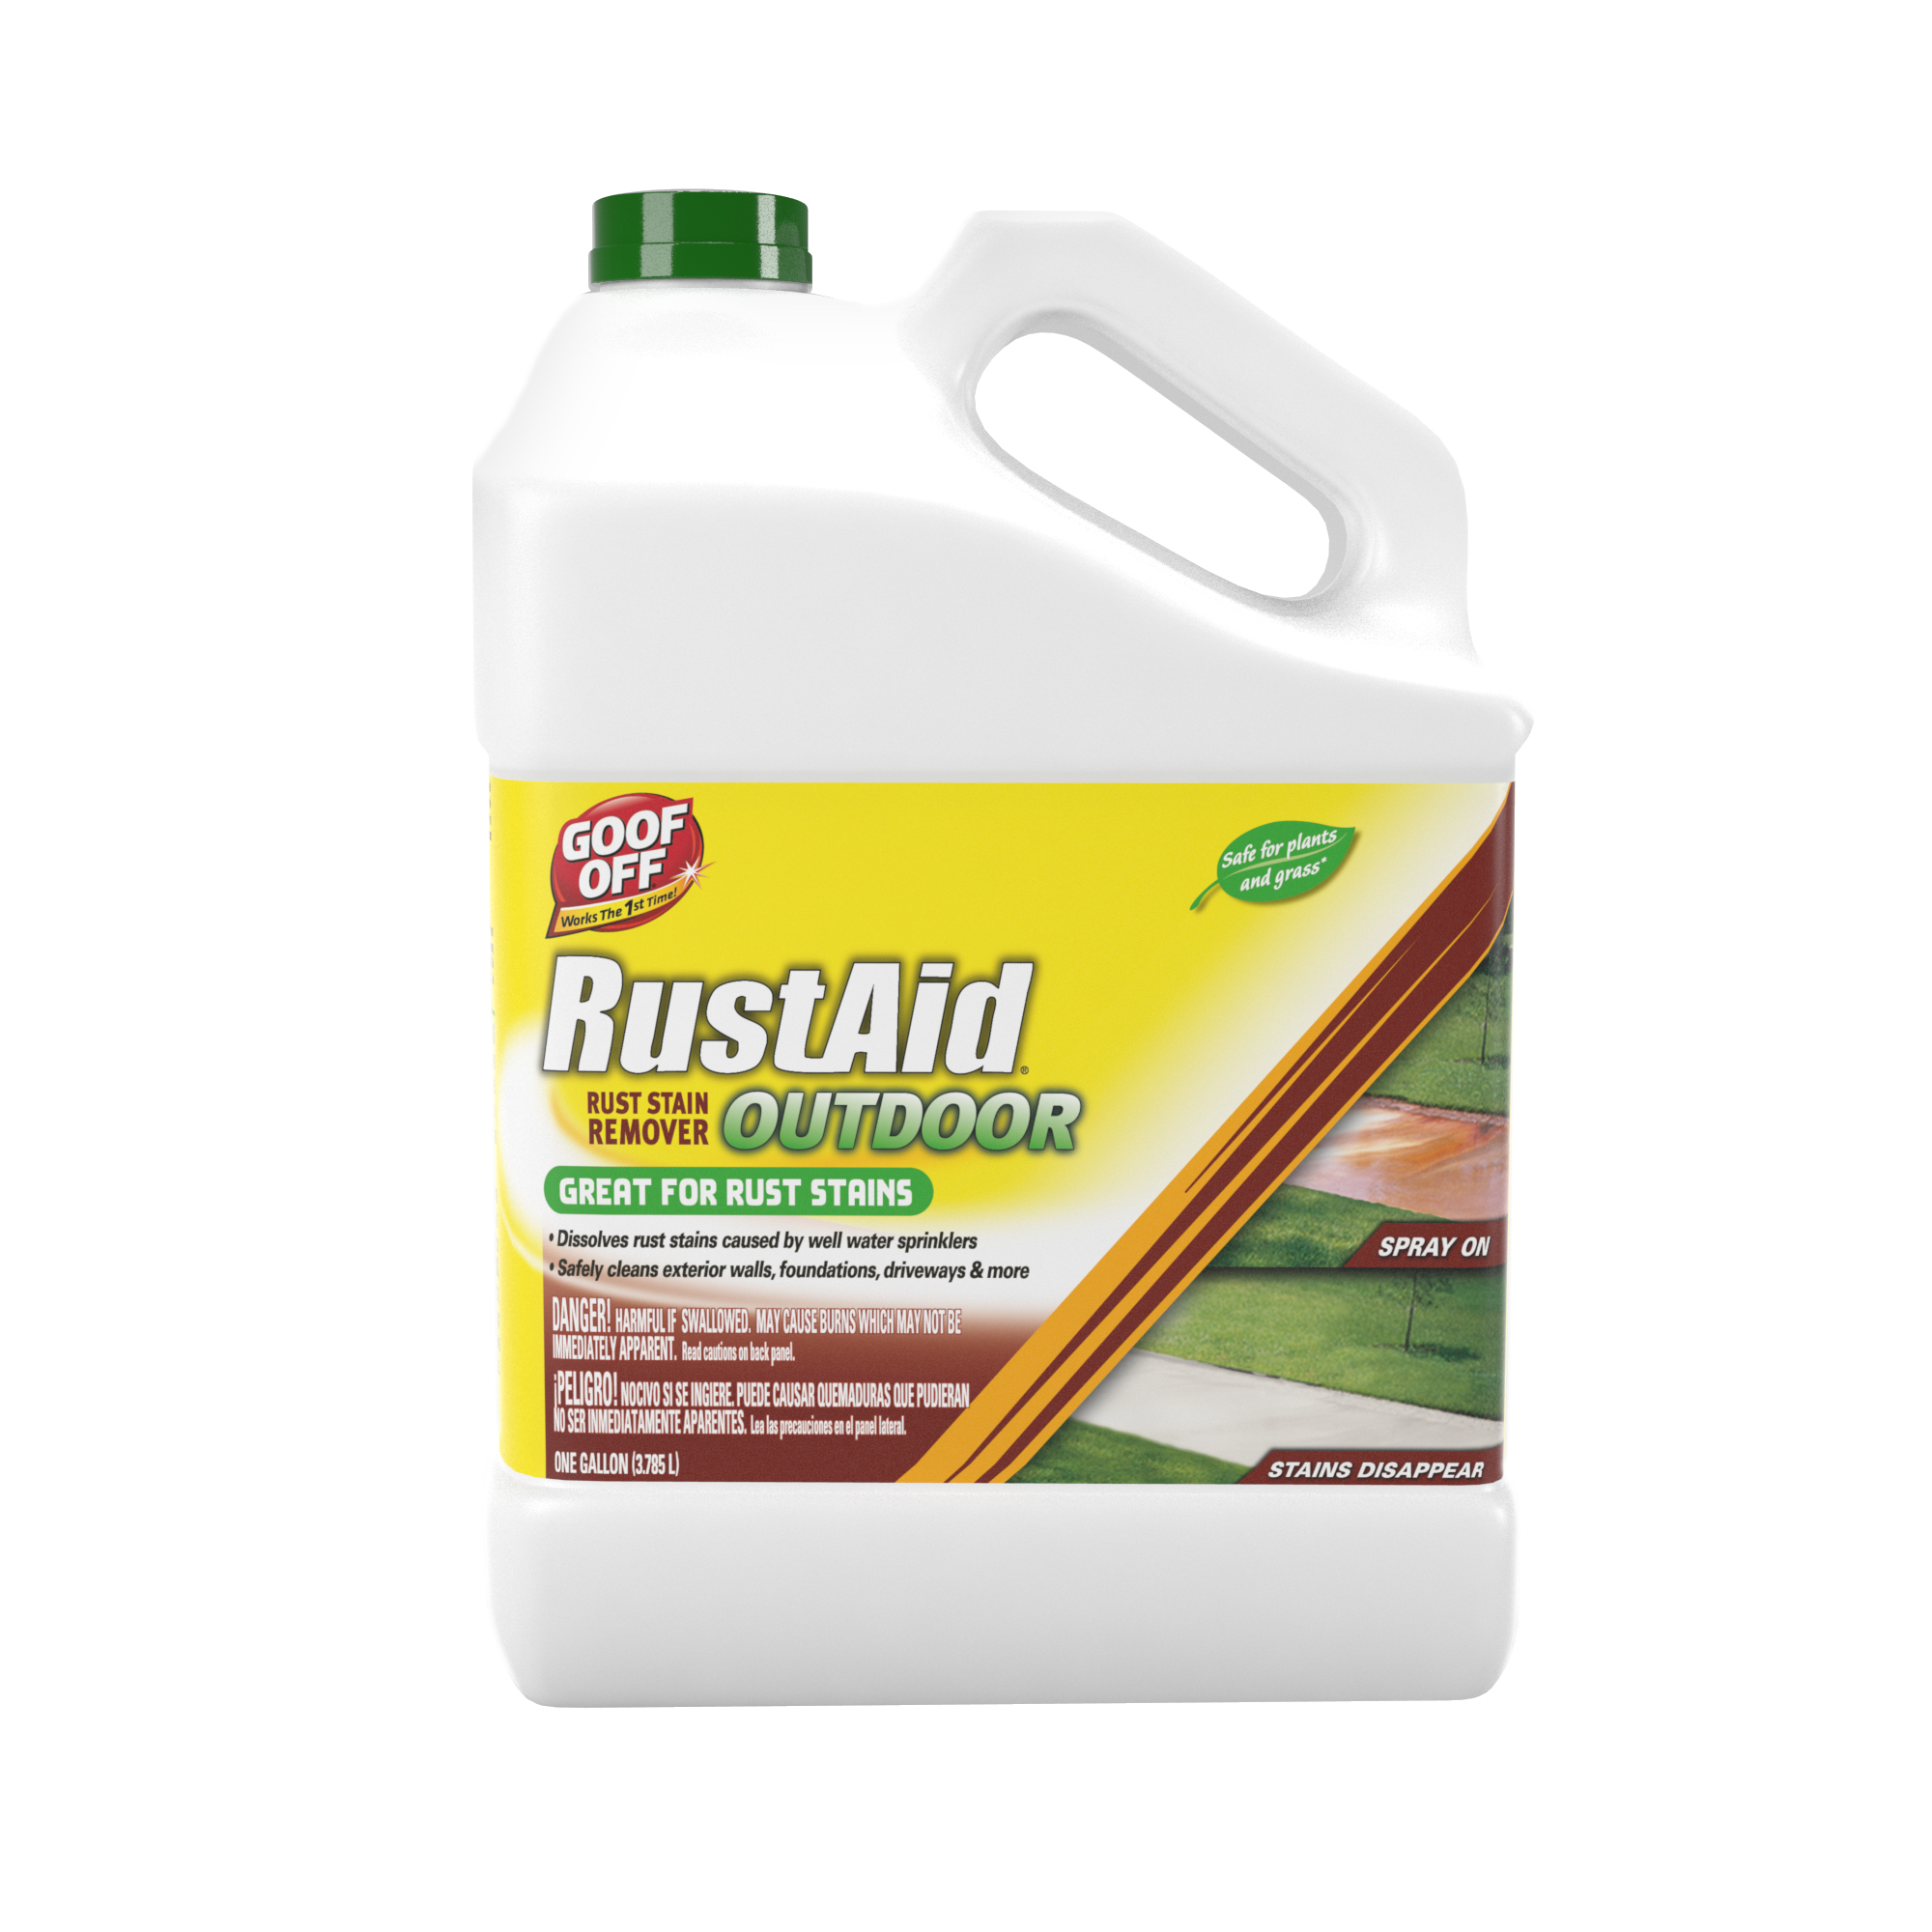 The Best Rust Remover For Metal & Its benefits